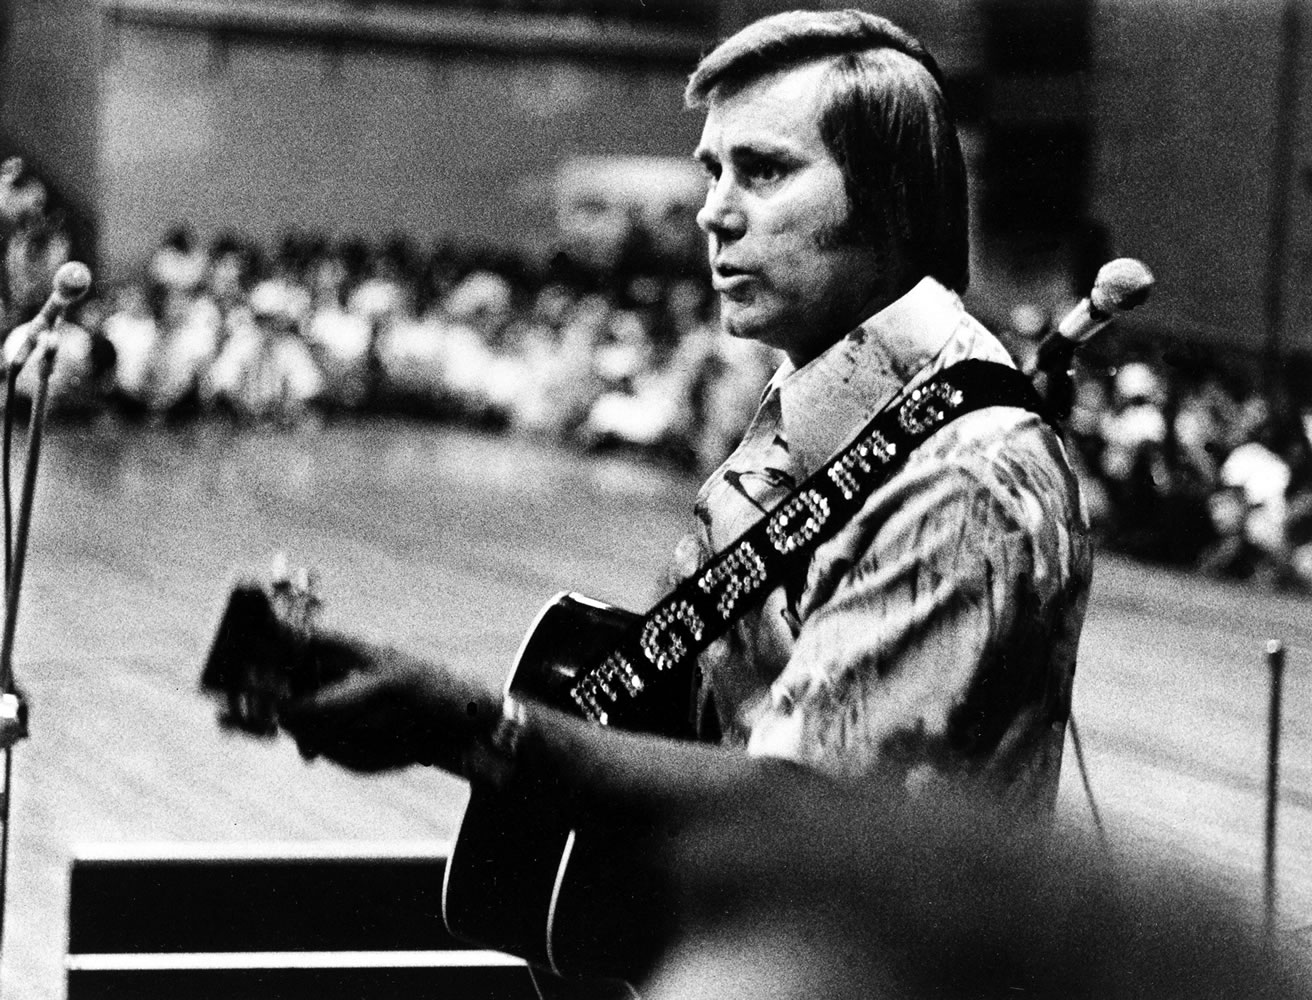 In this undated photo, Country singer George Jones is shown performing with his guitar. Jones, the peerless, hard-living country singer who recorded dozens of hits about good times and regrets and peaked with the heartbreaking classic &quot;He Stopped Loving Her Today,&quot; has died. He was 81.